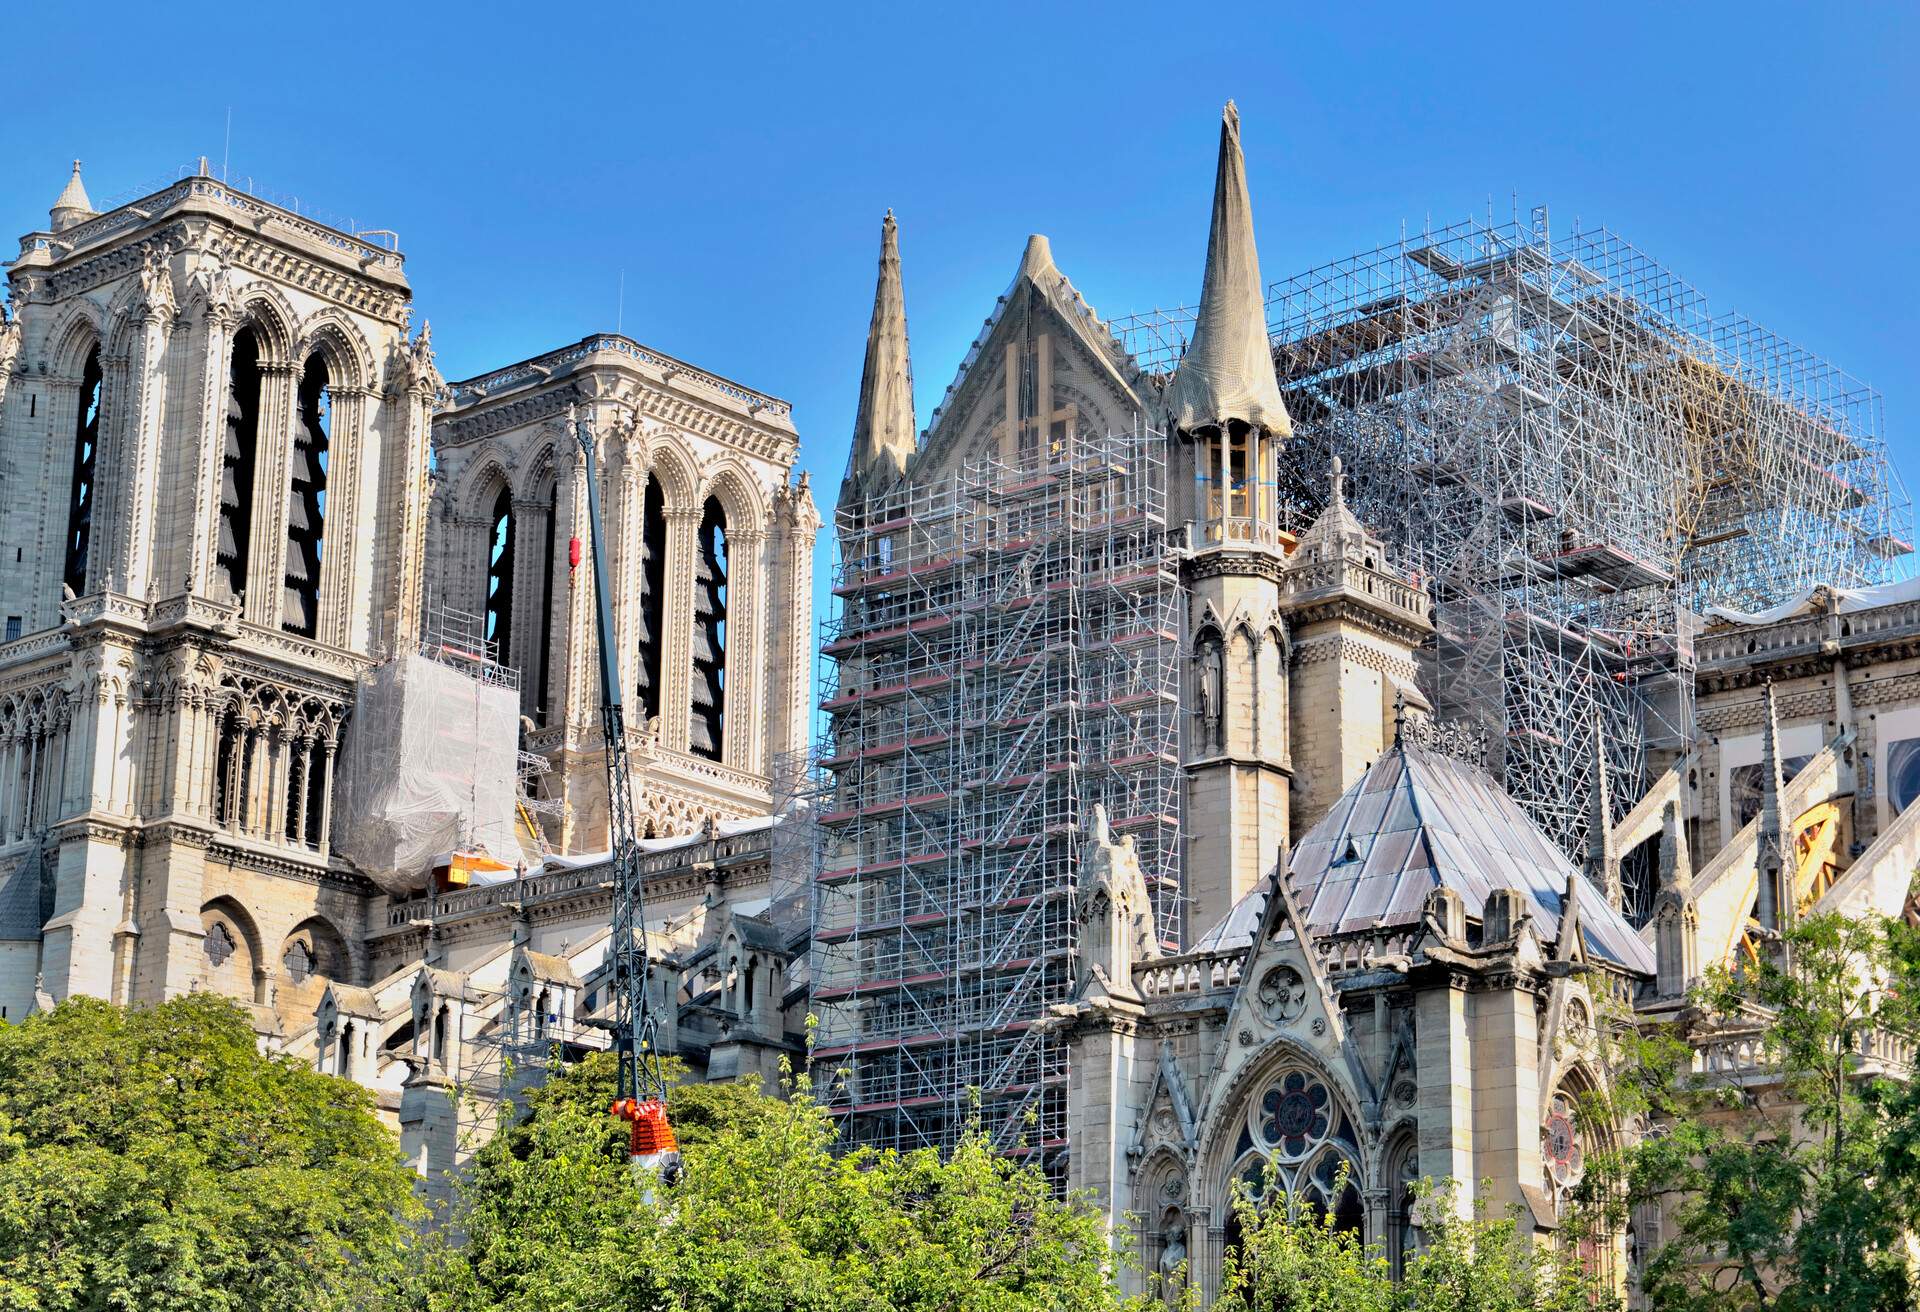 A closer look at the construction site of Notre Dame in Paris on a sunny spring day with a blue sky 